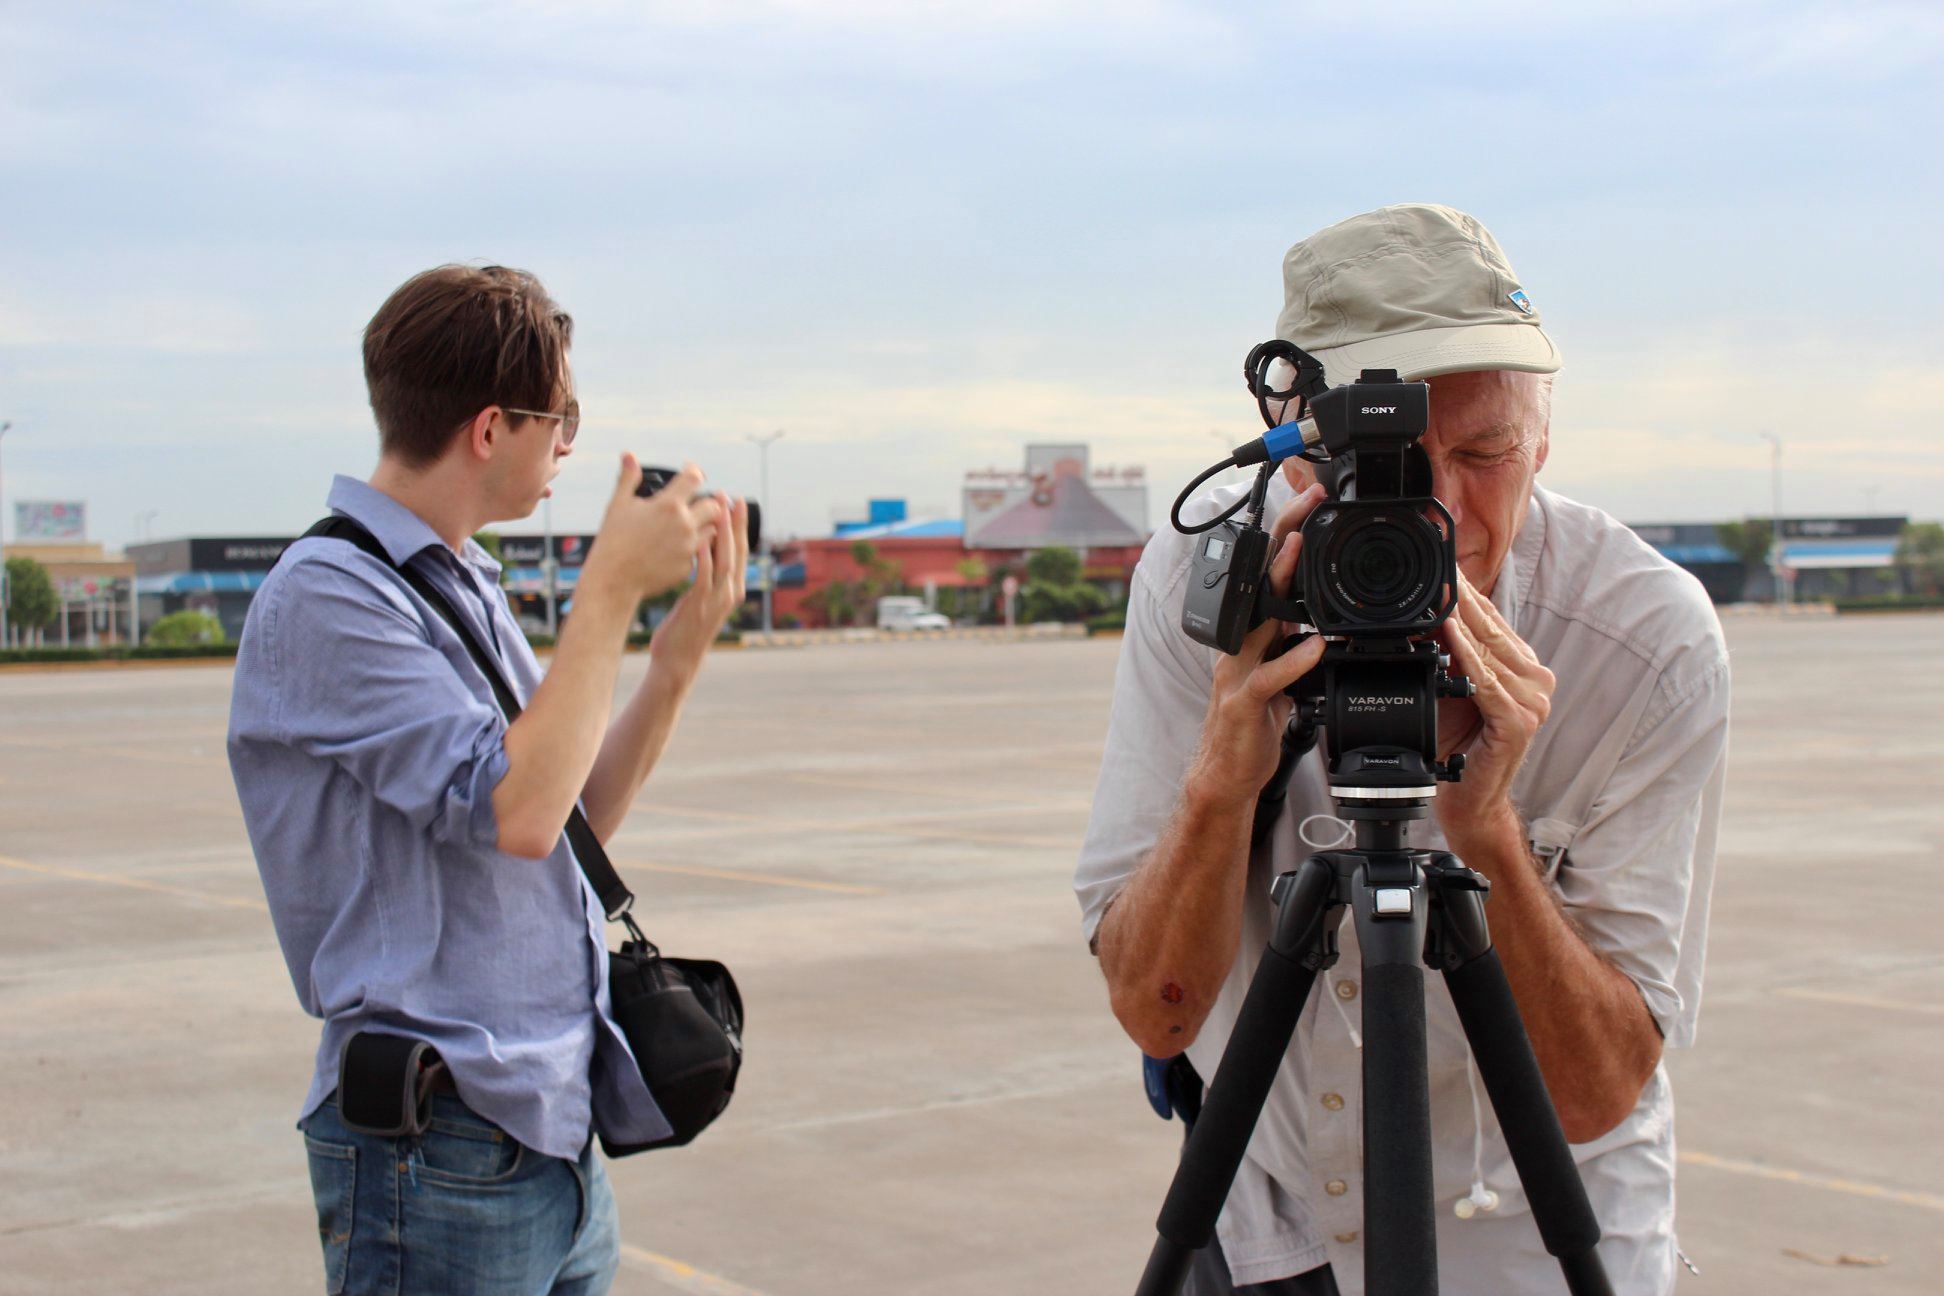 Lancaster and photographer Tom Adair shoot images of Phnom Penh's construction boom from an empty parking lot. Security asked them to leave shortly after.  (Credit: Sarah Clune Hartman)